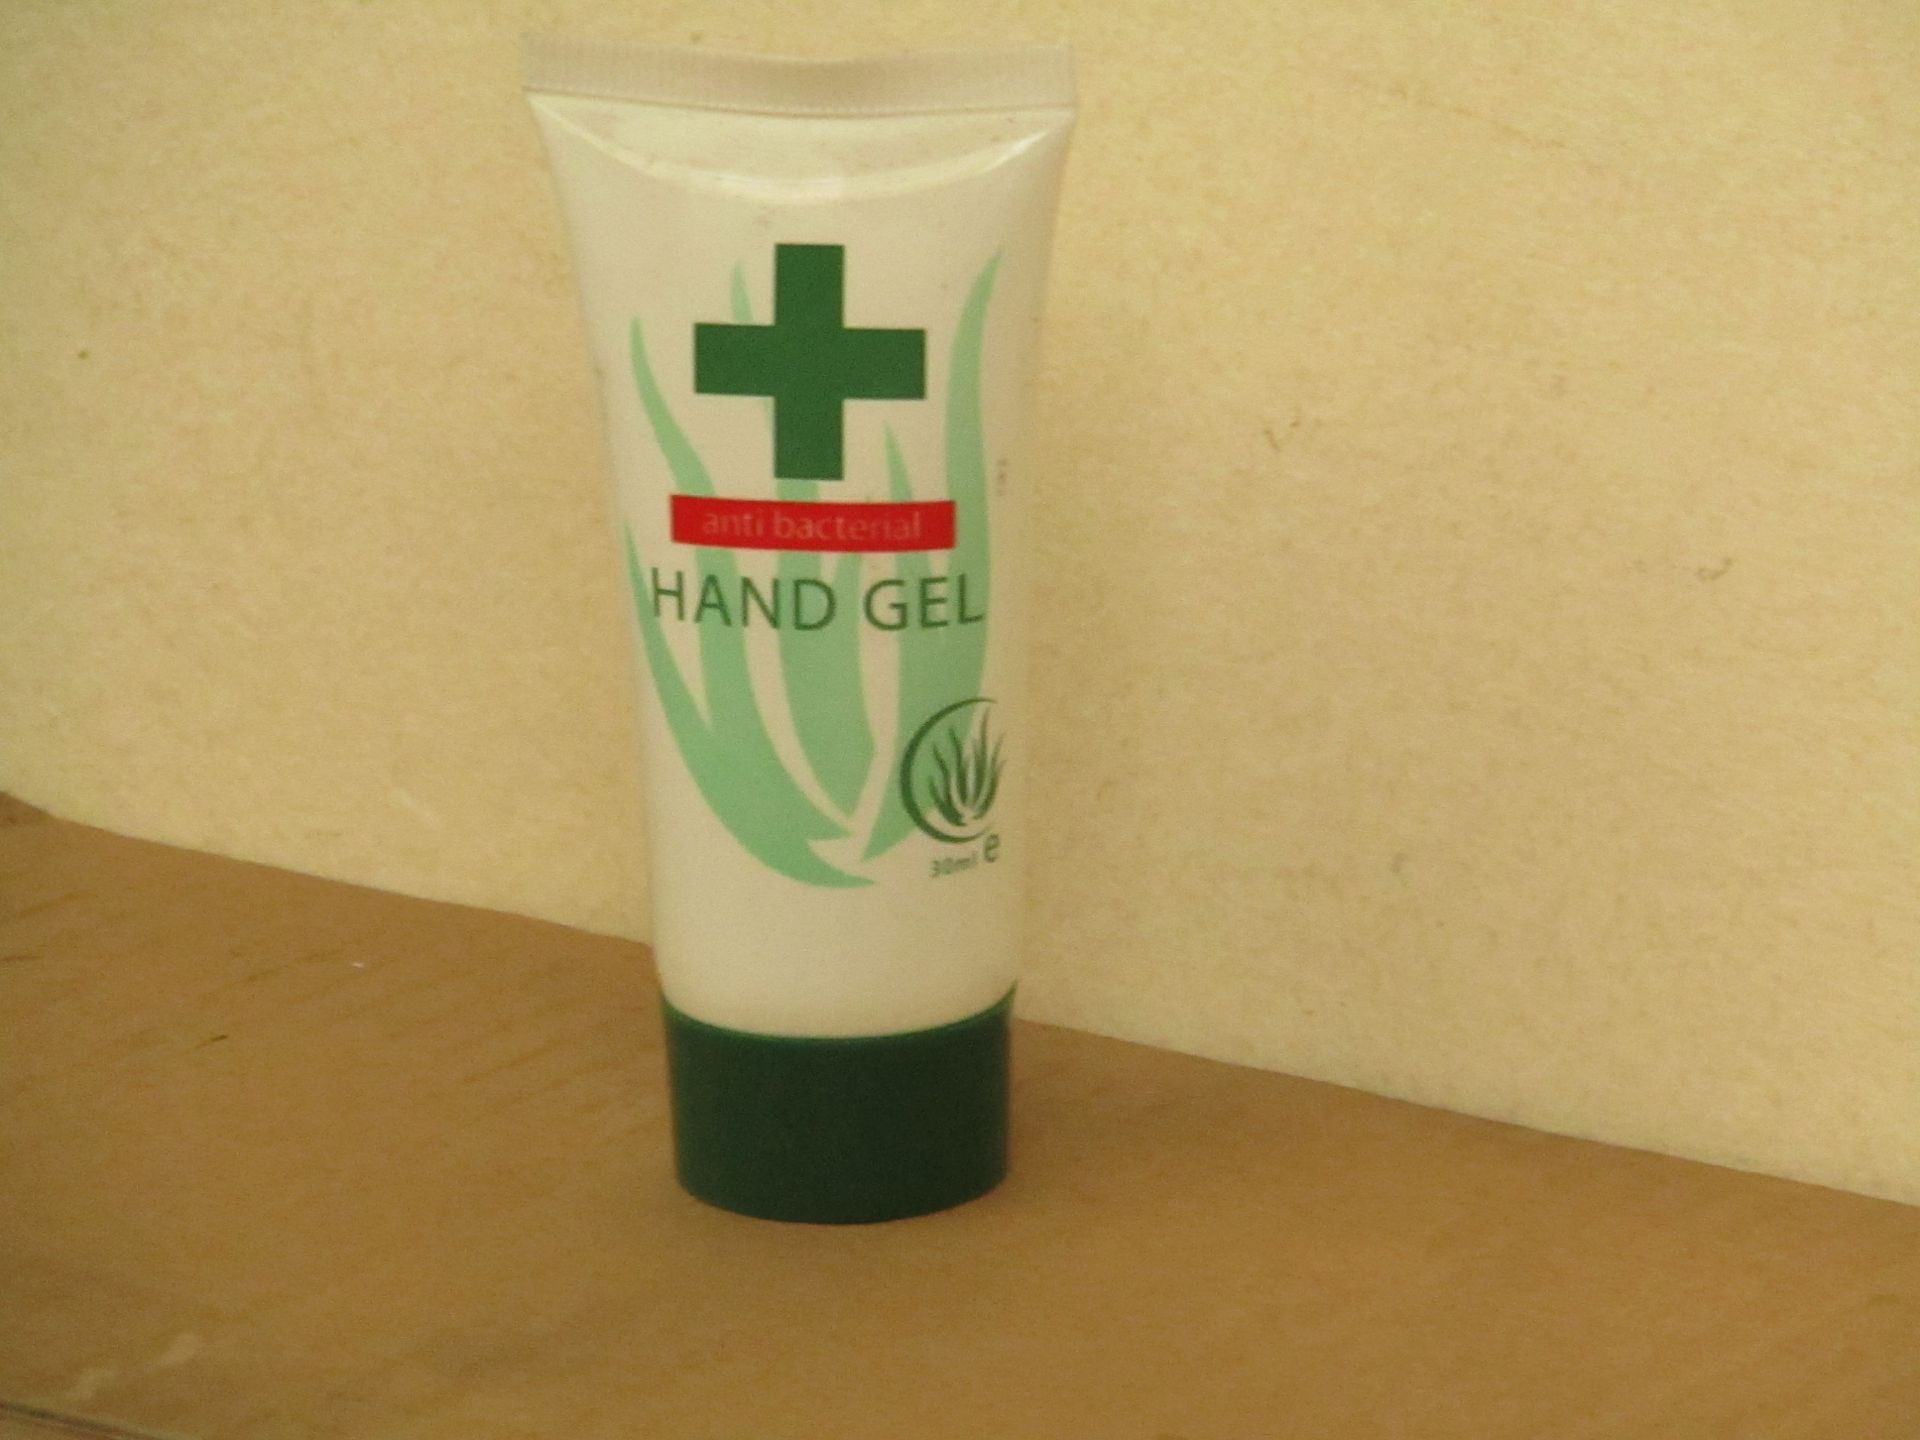 100 x 30ml anti bacterial hand gel tubes, new and boxed.